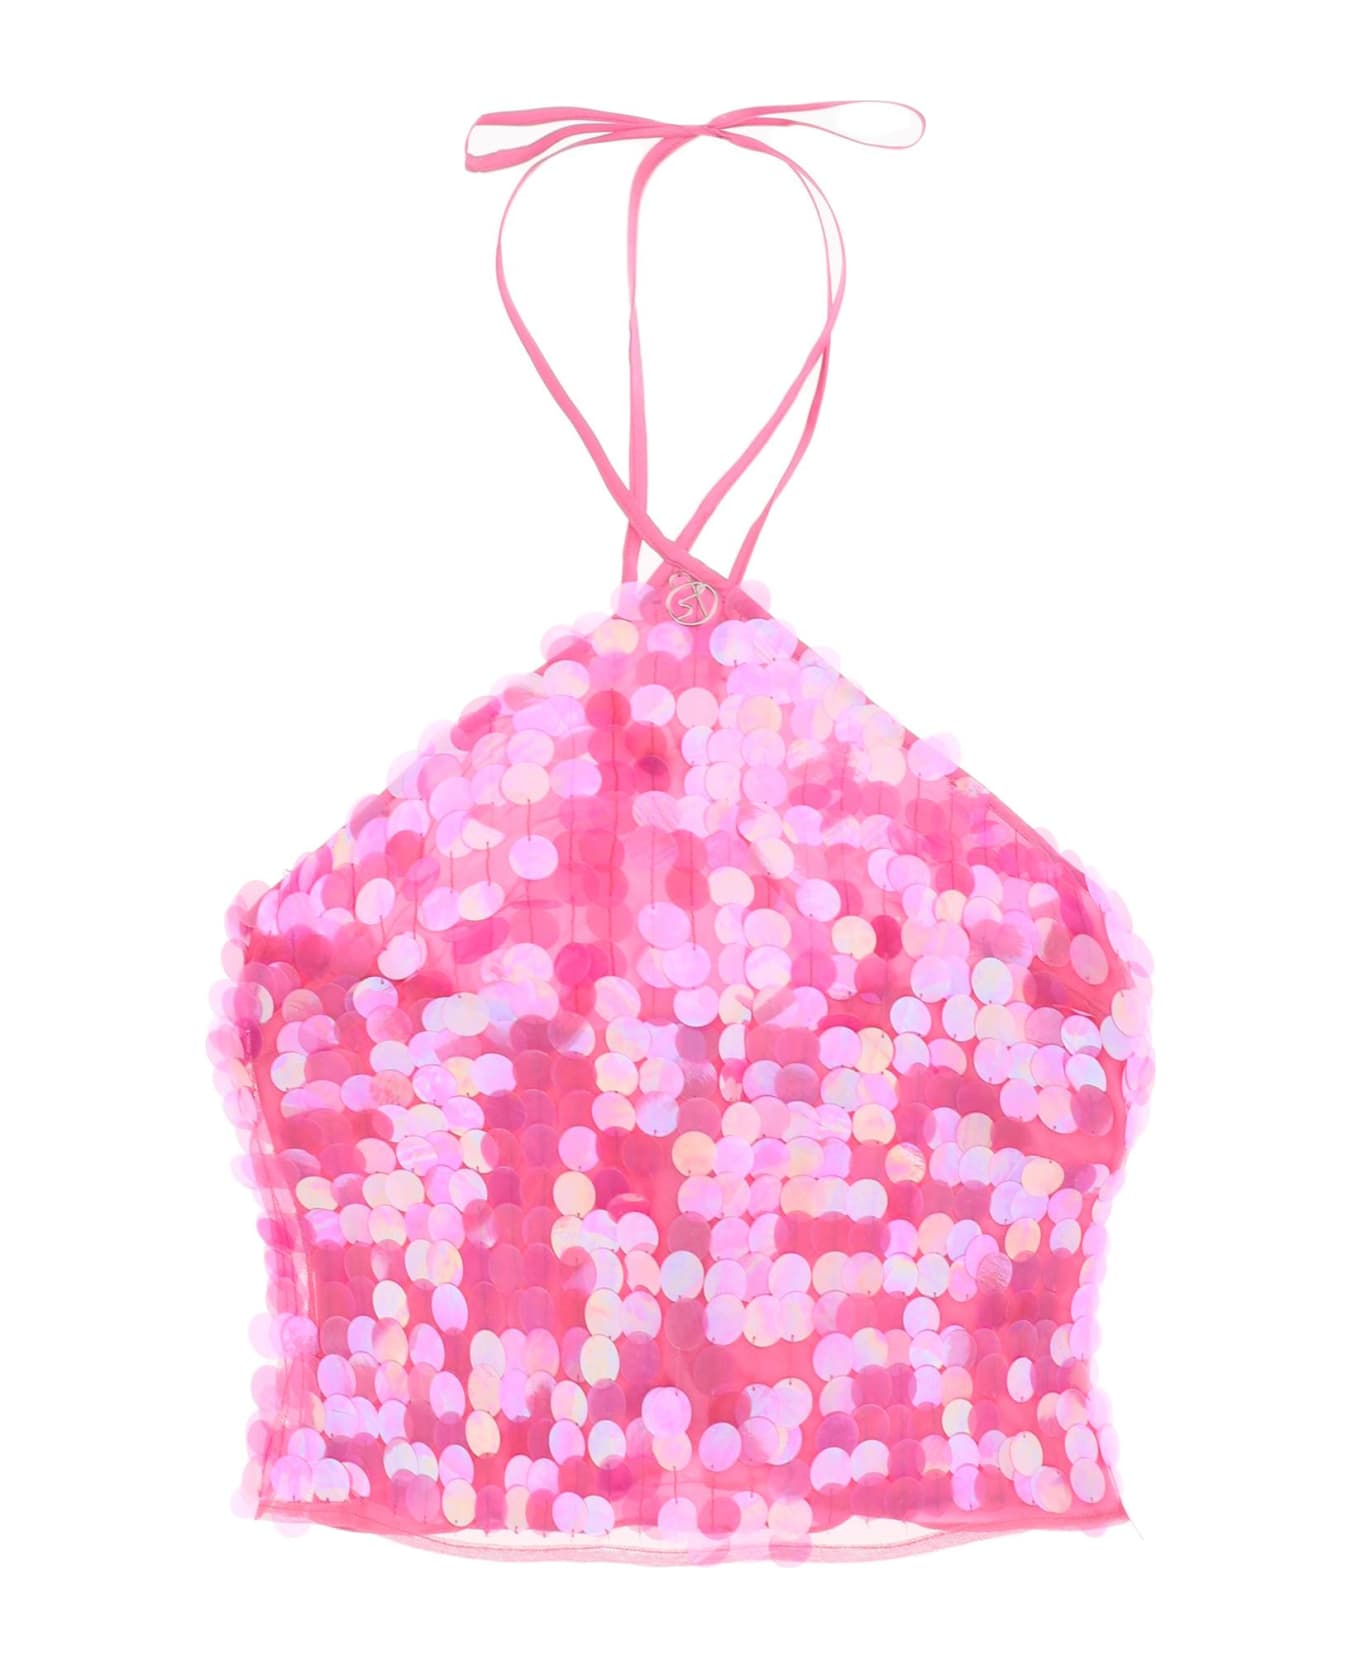 Saks Potts 'anouk' Top With Sequins - PINK SEQUIN (Fuchsia)